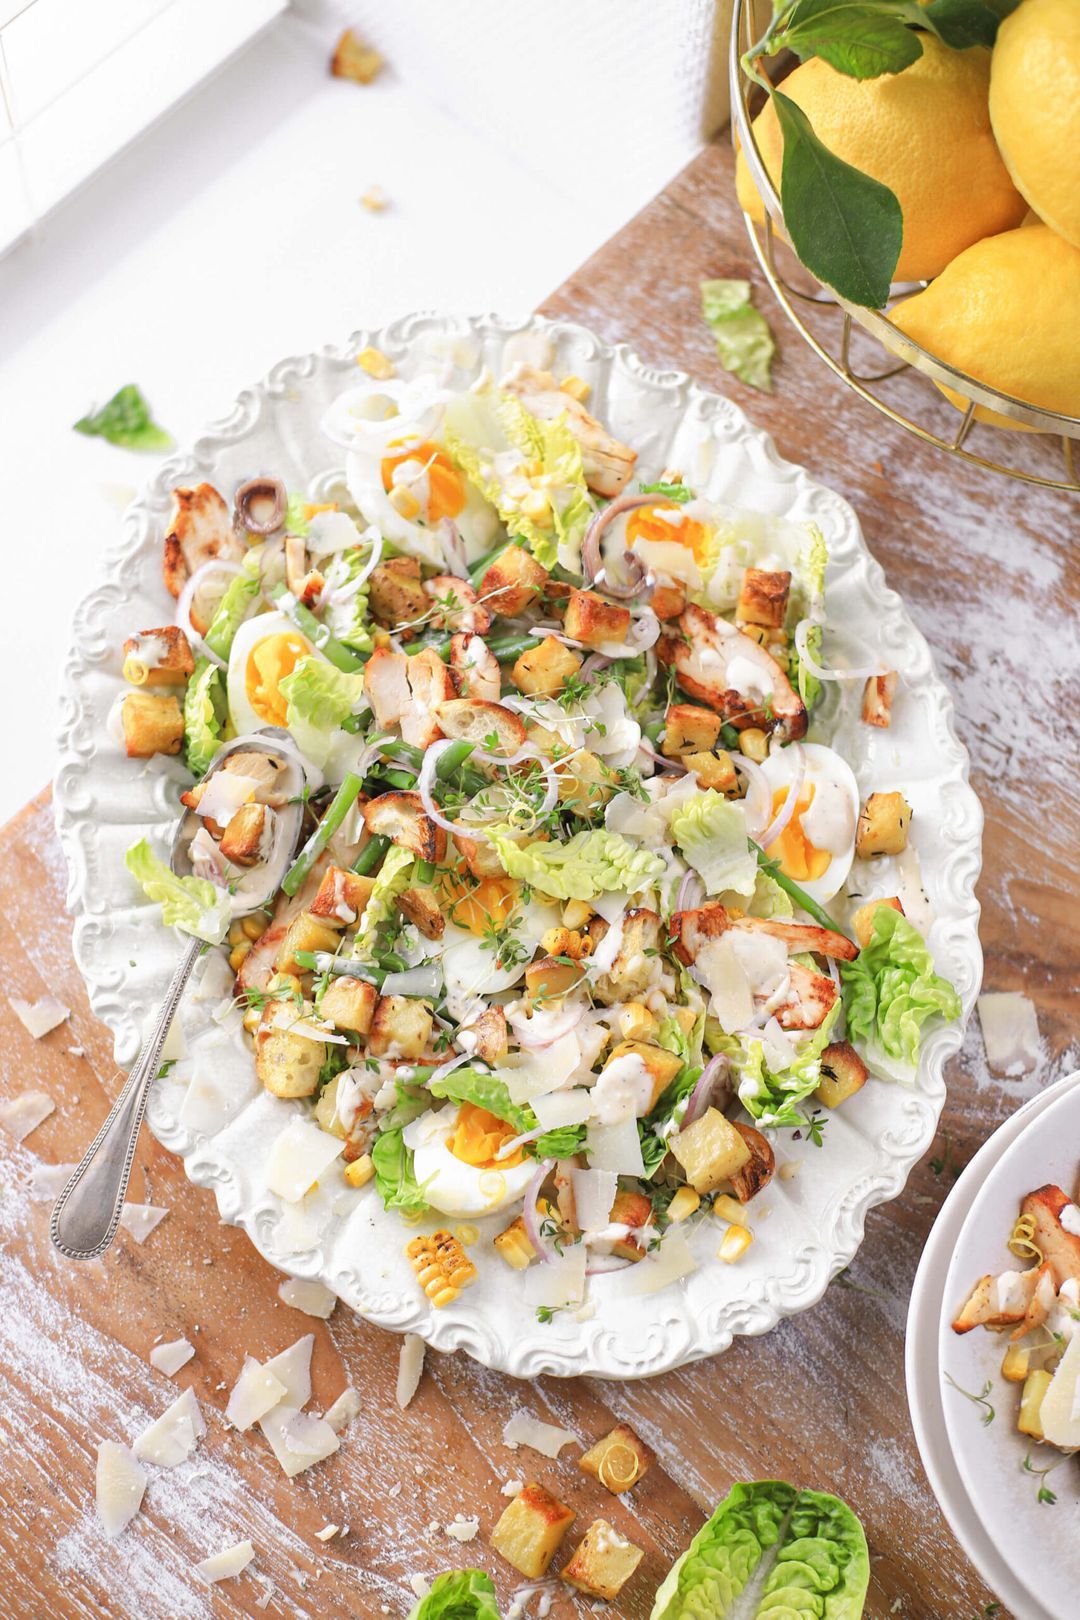 Caesar salad with lemon, chicken, beans and anchovies